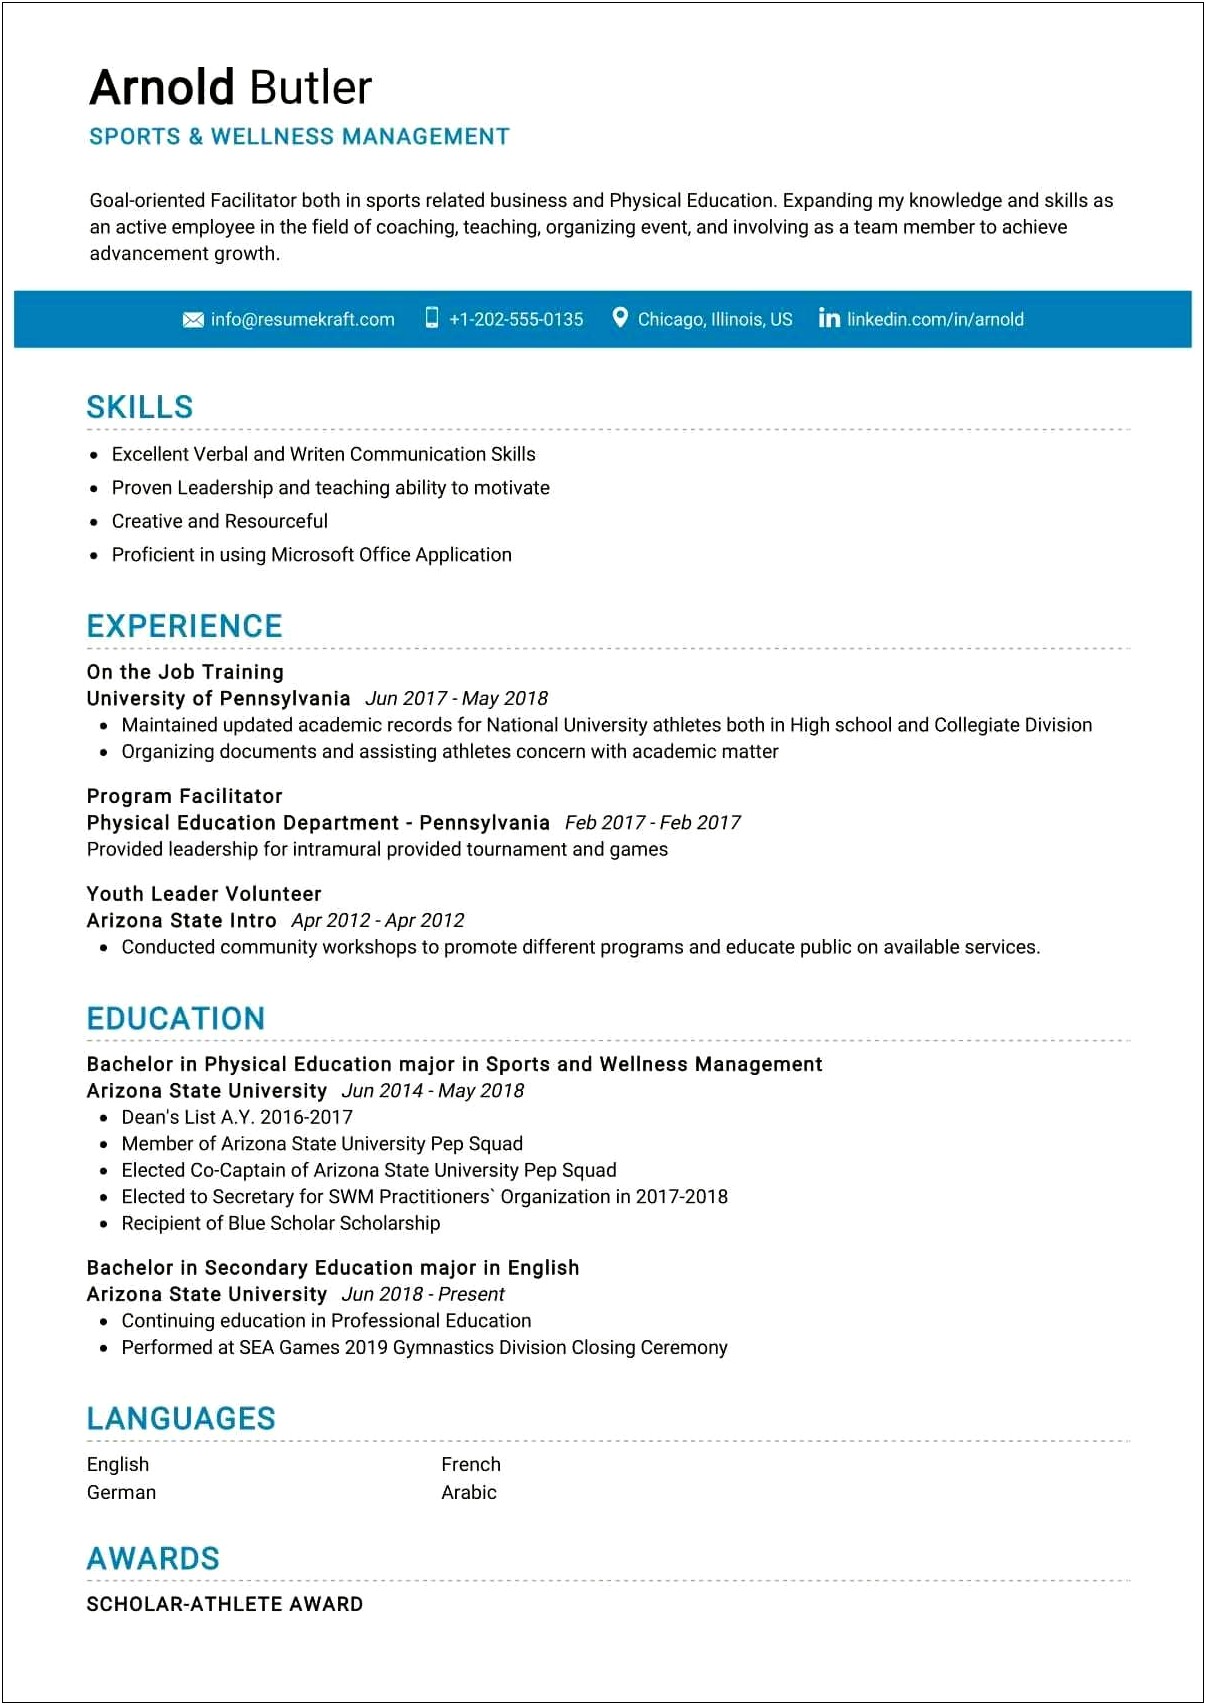 Resume Examples For Wellness Coach